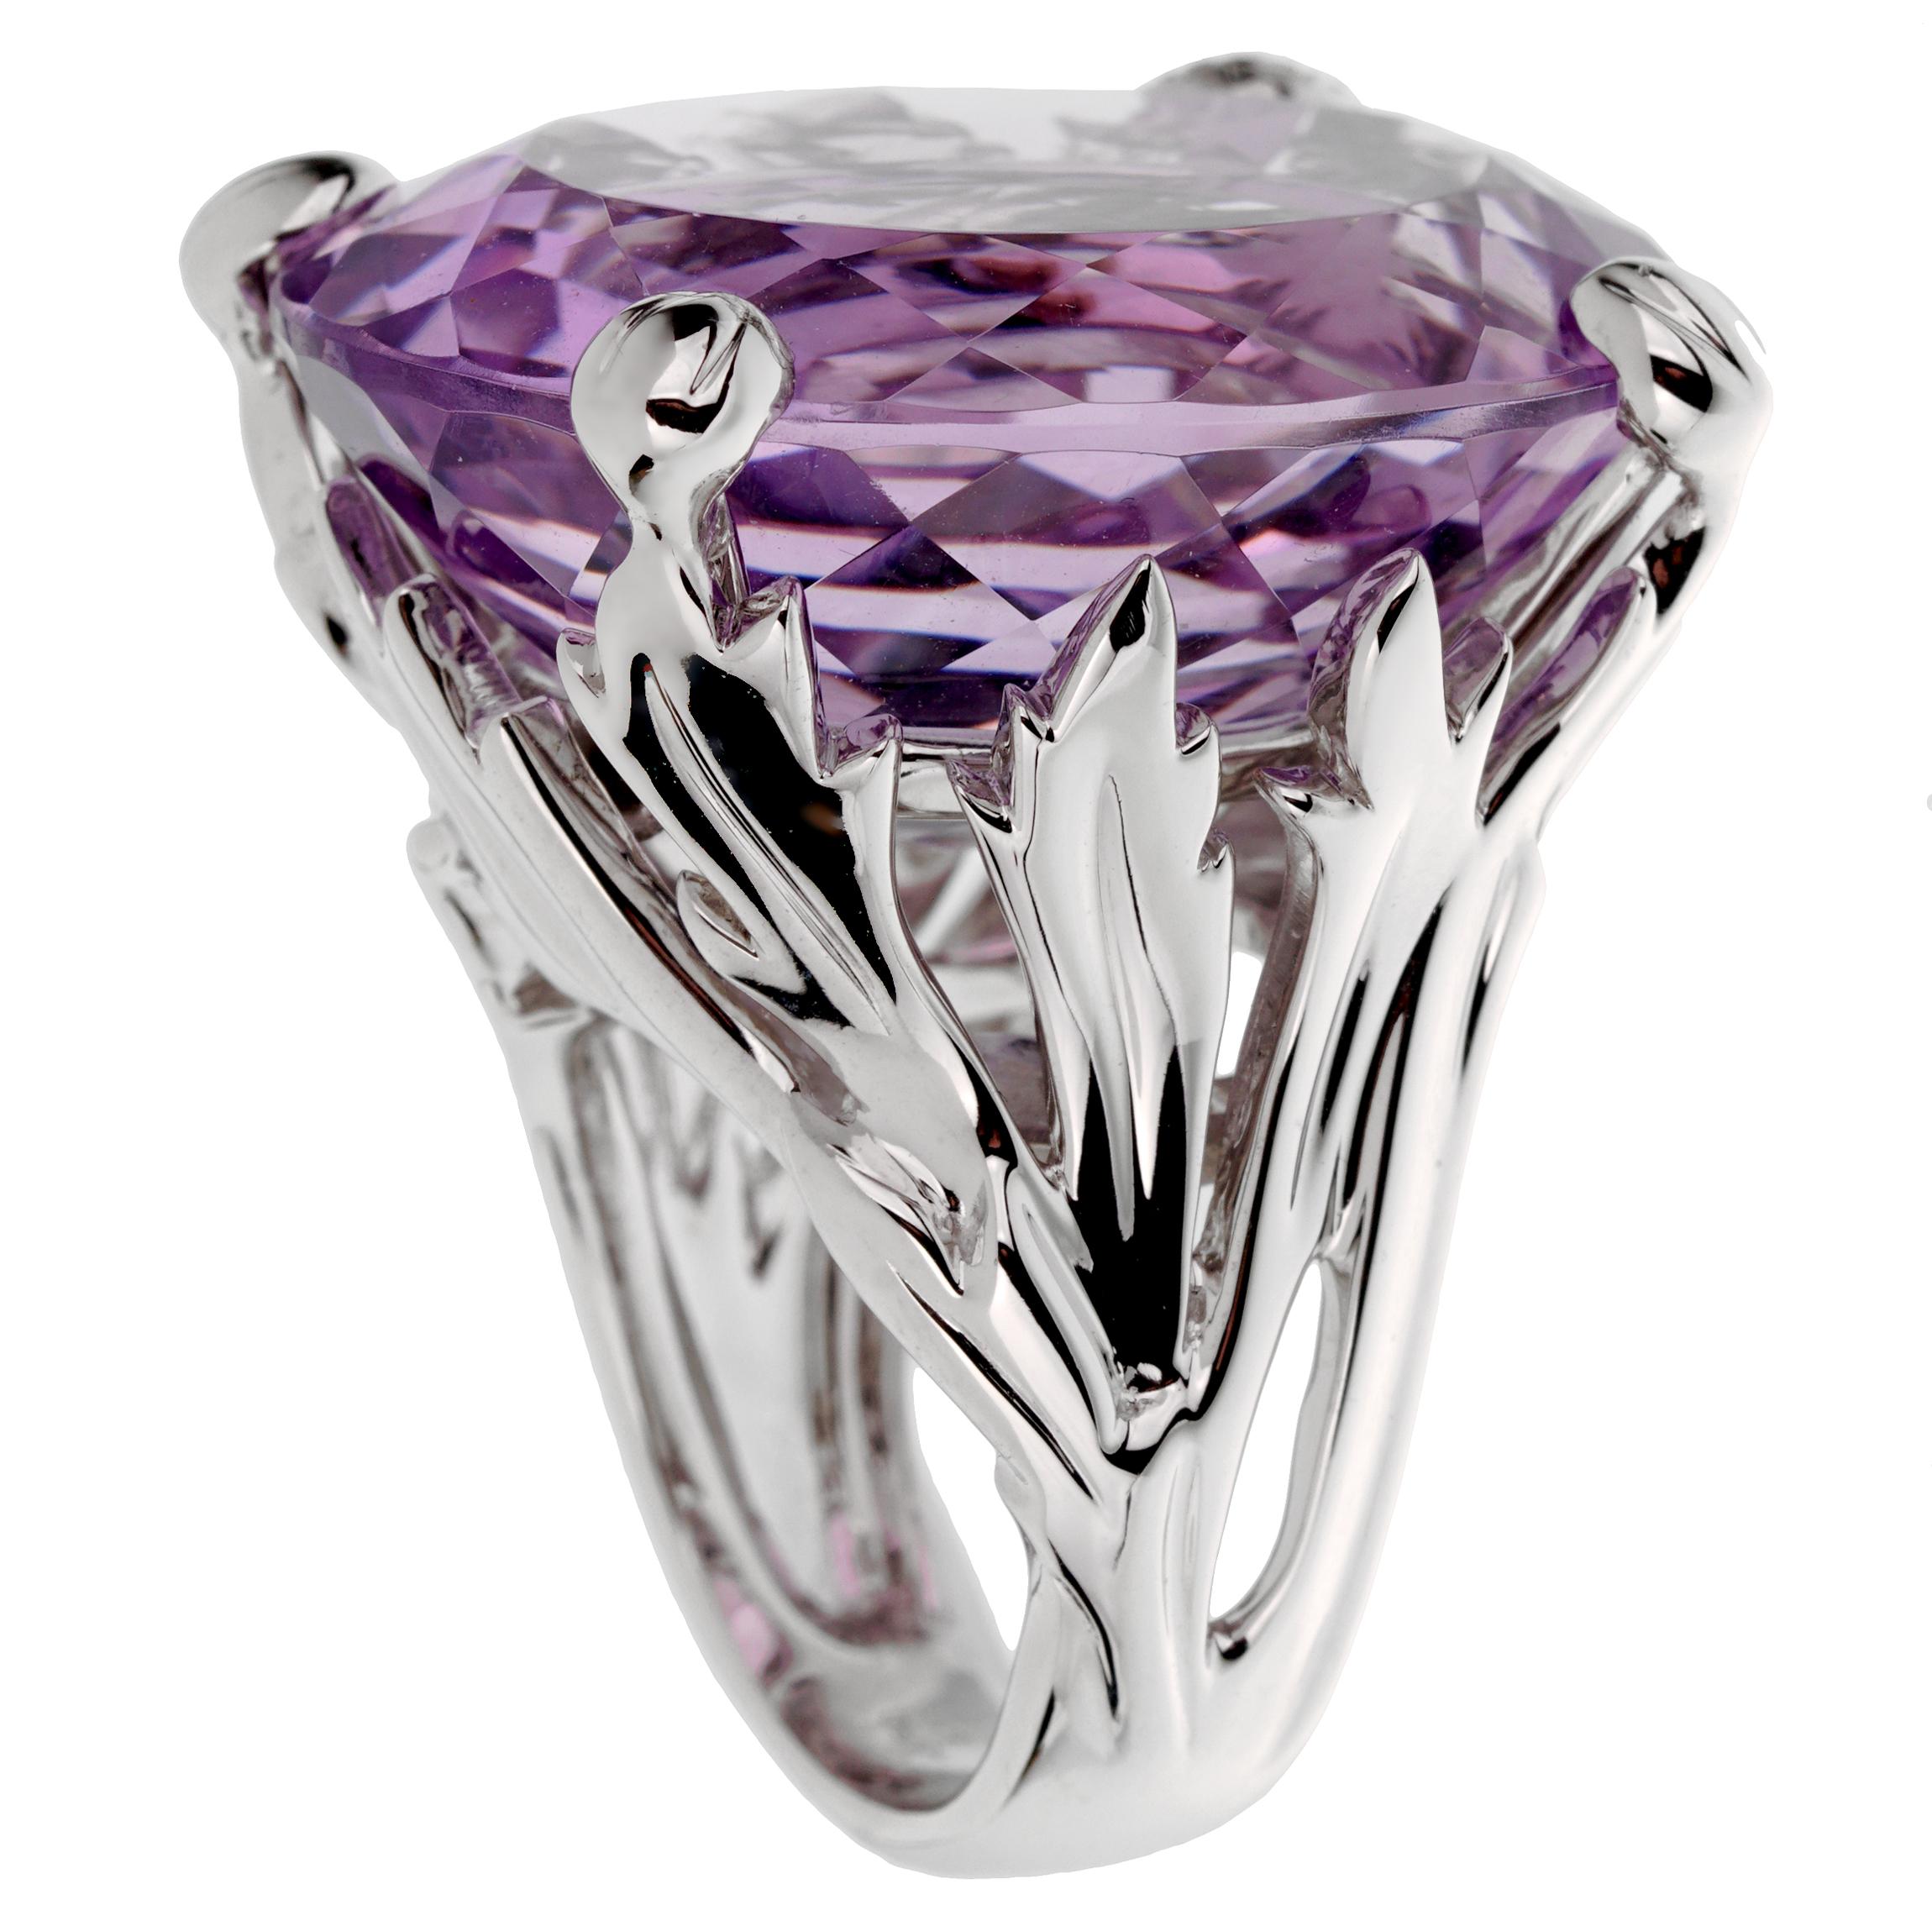 An incredible Christian Dior cocktail ring showcasing a 44.5ct oval amethyst adorned by .12ct of the finest round brilliant cut diamonds in 18k white gold. Euro Size 53

Sku: 2783